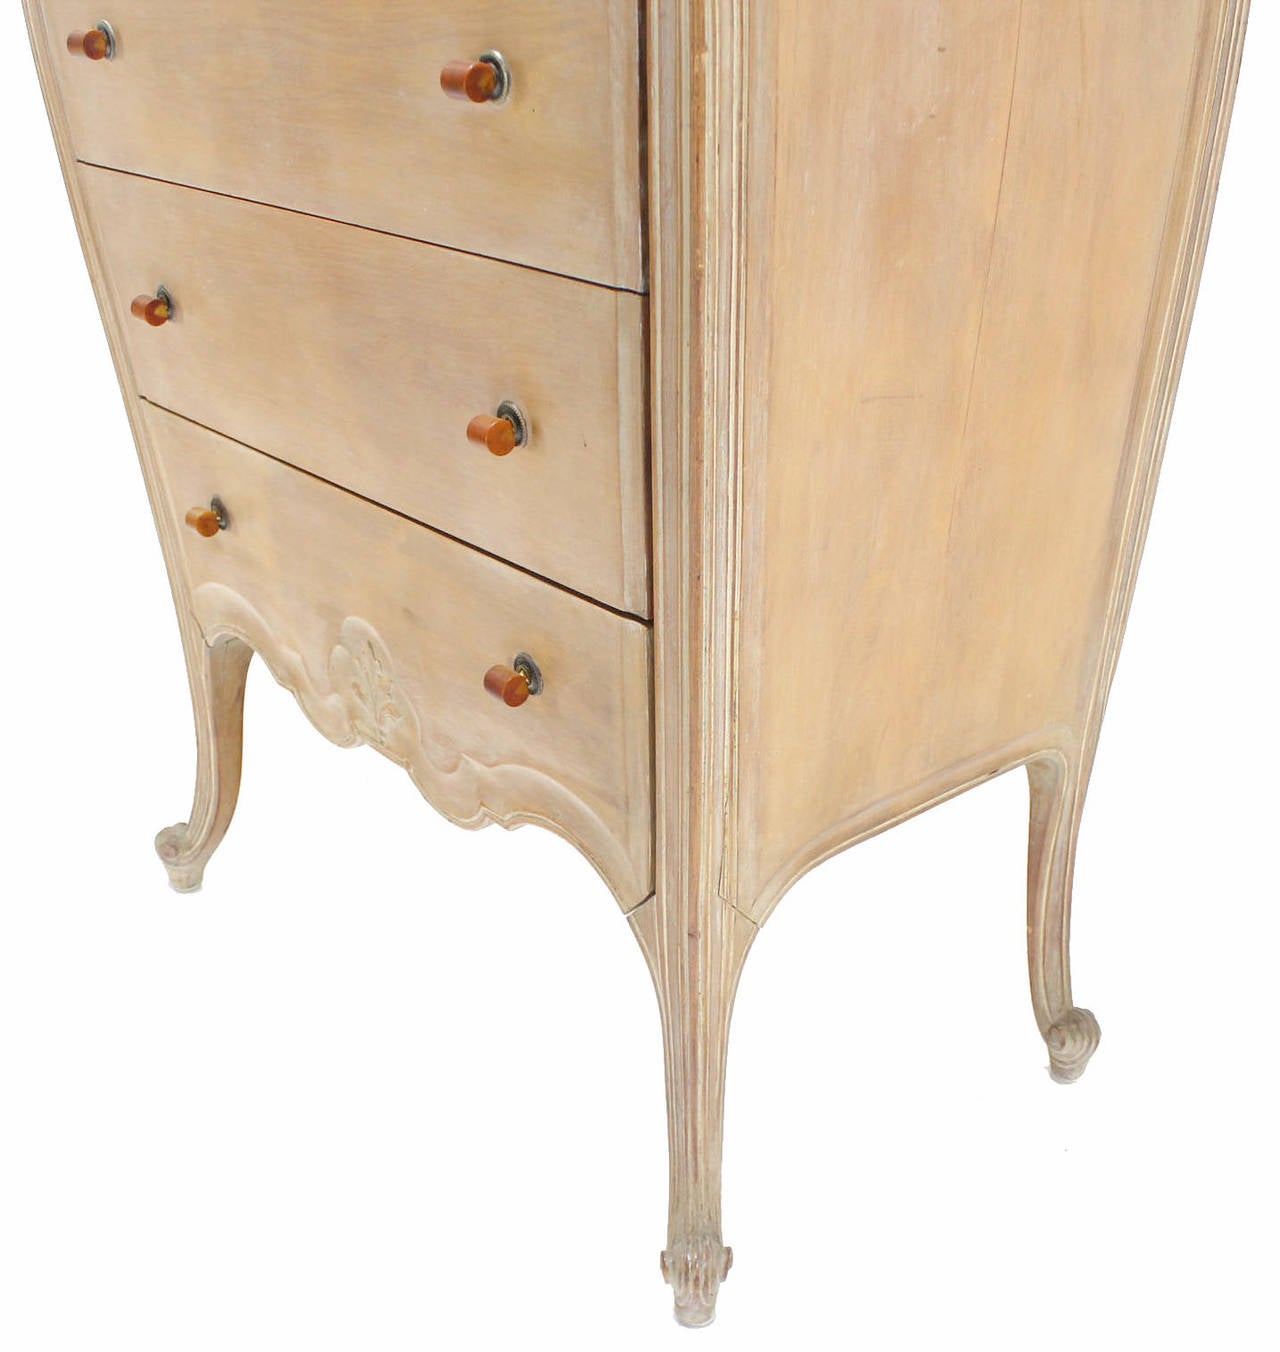 American Carved Bombay High Chest Dresser with Bakelite Pulls on High Legs, circa 1930s